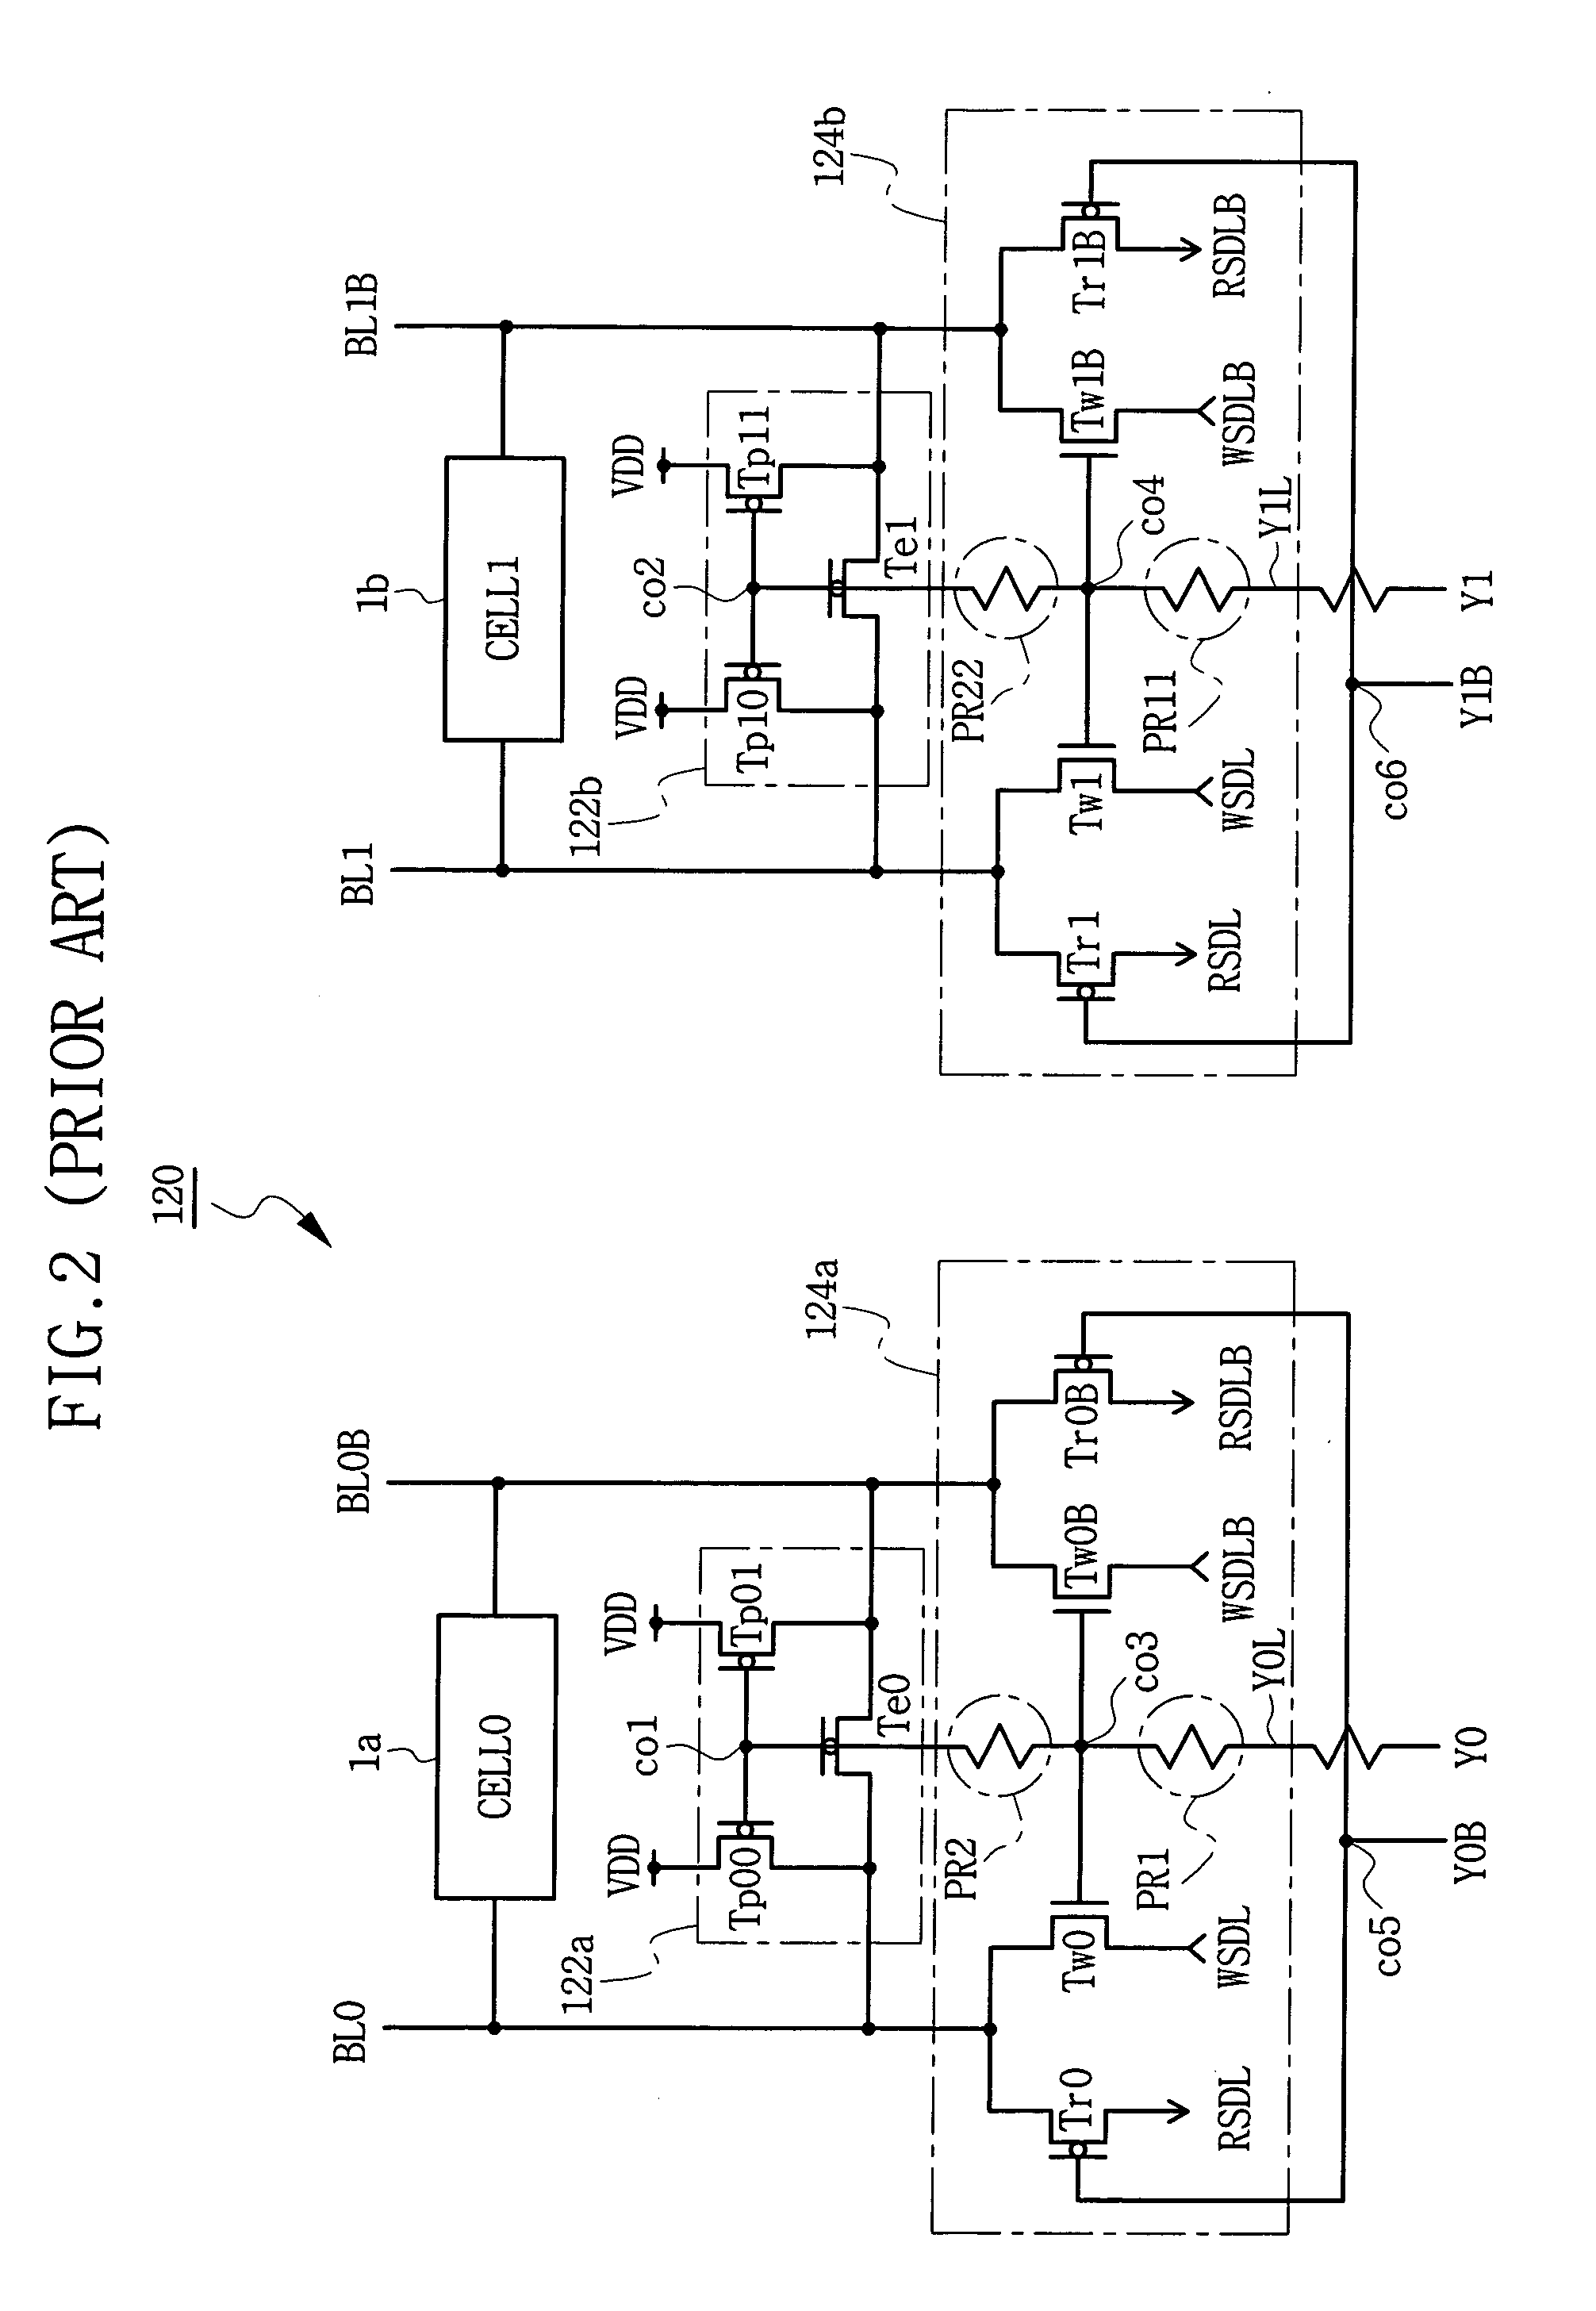 Circuit wiring layout in semiconductor memory device and layout method